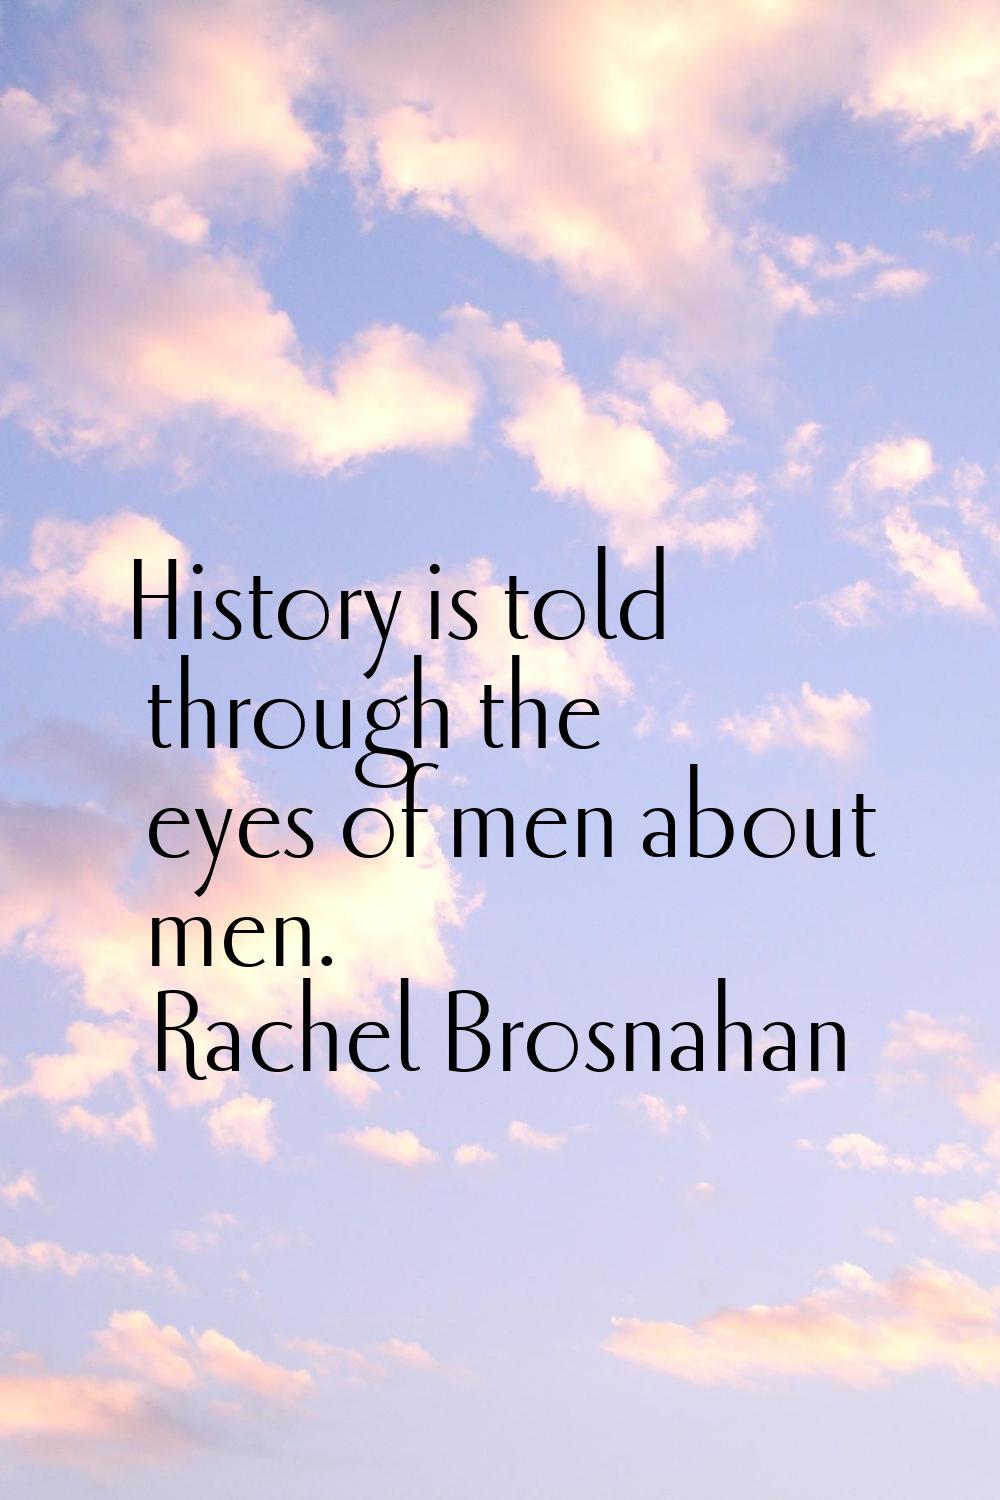 History is told through the eyes of men about men.